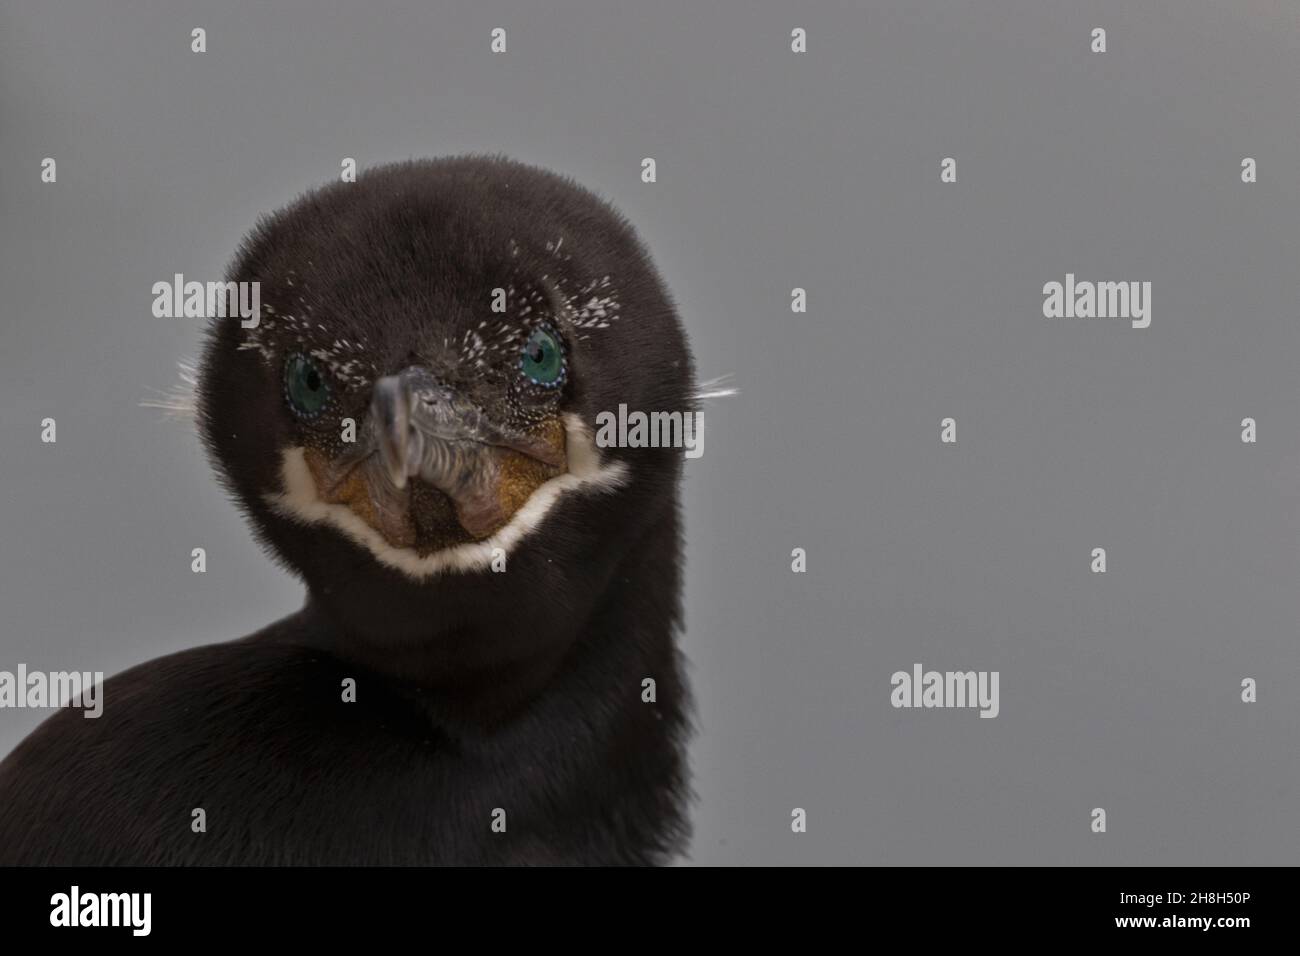 Close up head and face portrait of cormorant accented by its teal blue eyes and dark plumage with copy space on right side of horizontal photograph Stock Photo